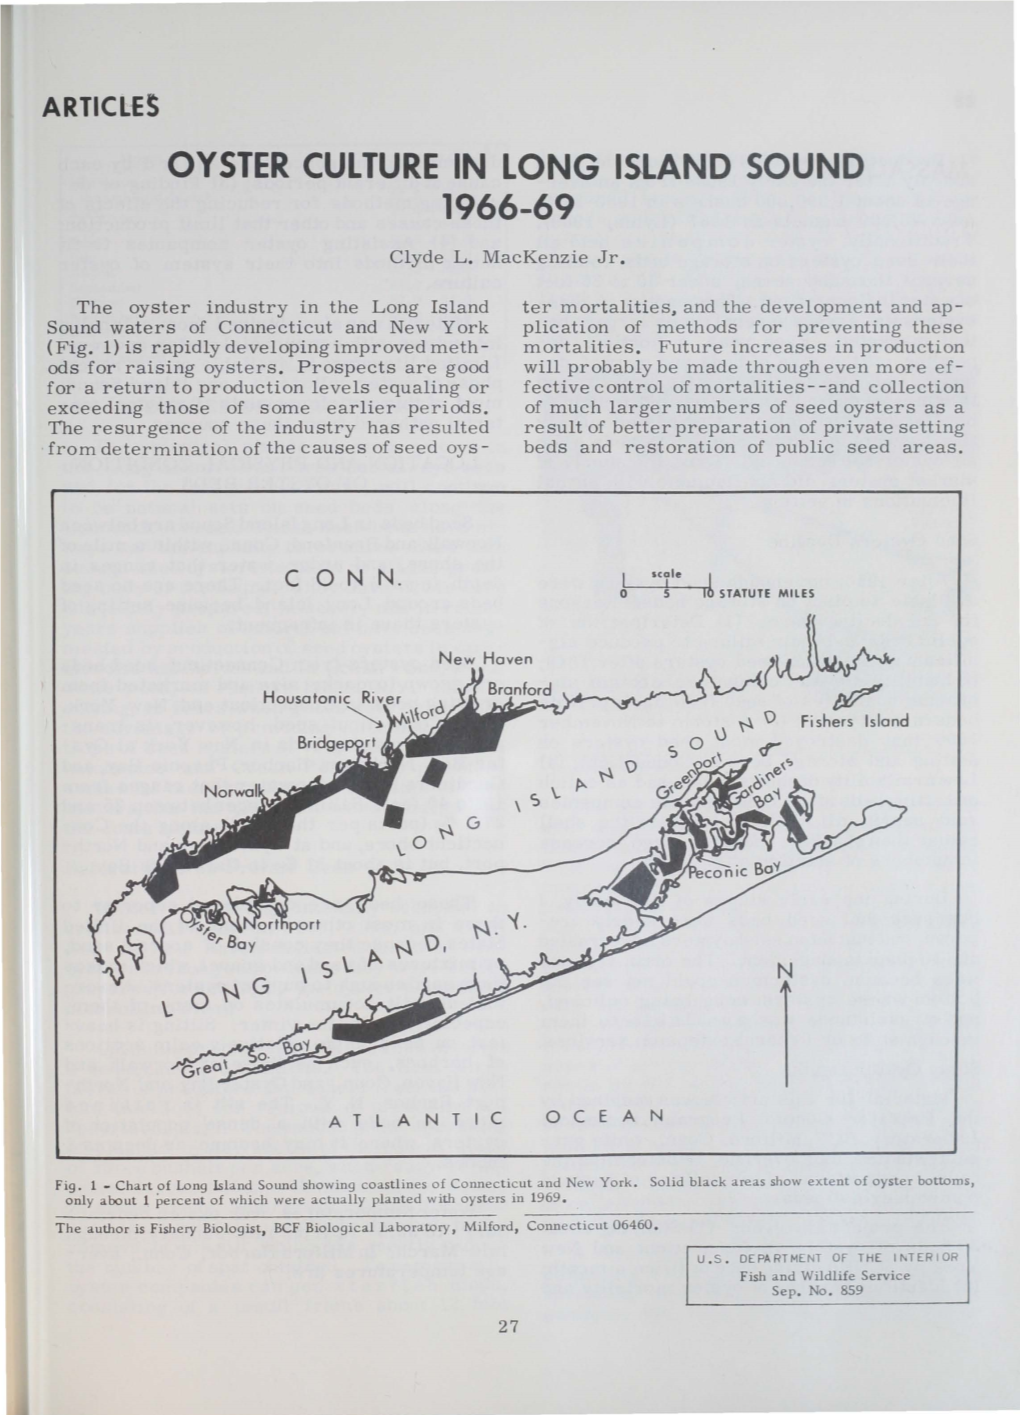 Oyster Culture in Long Island Sound 1966-69